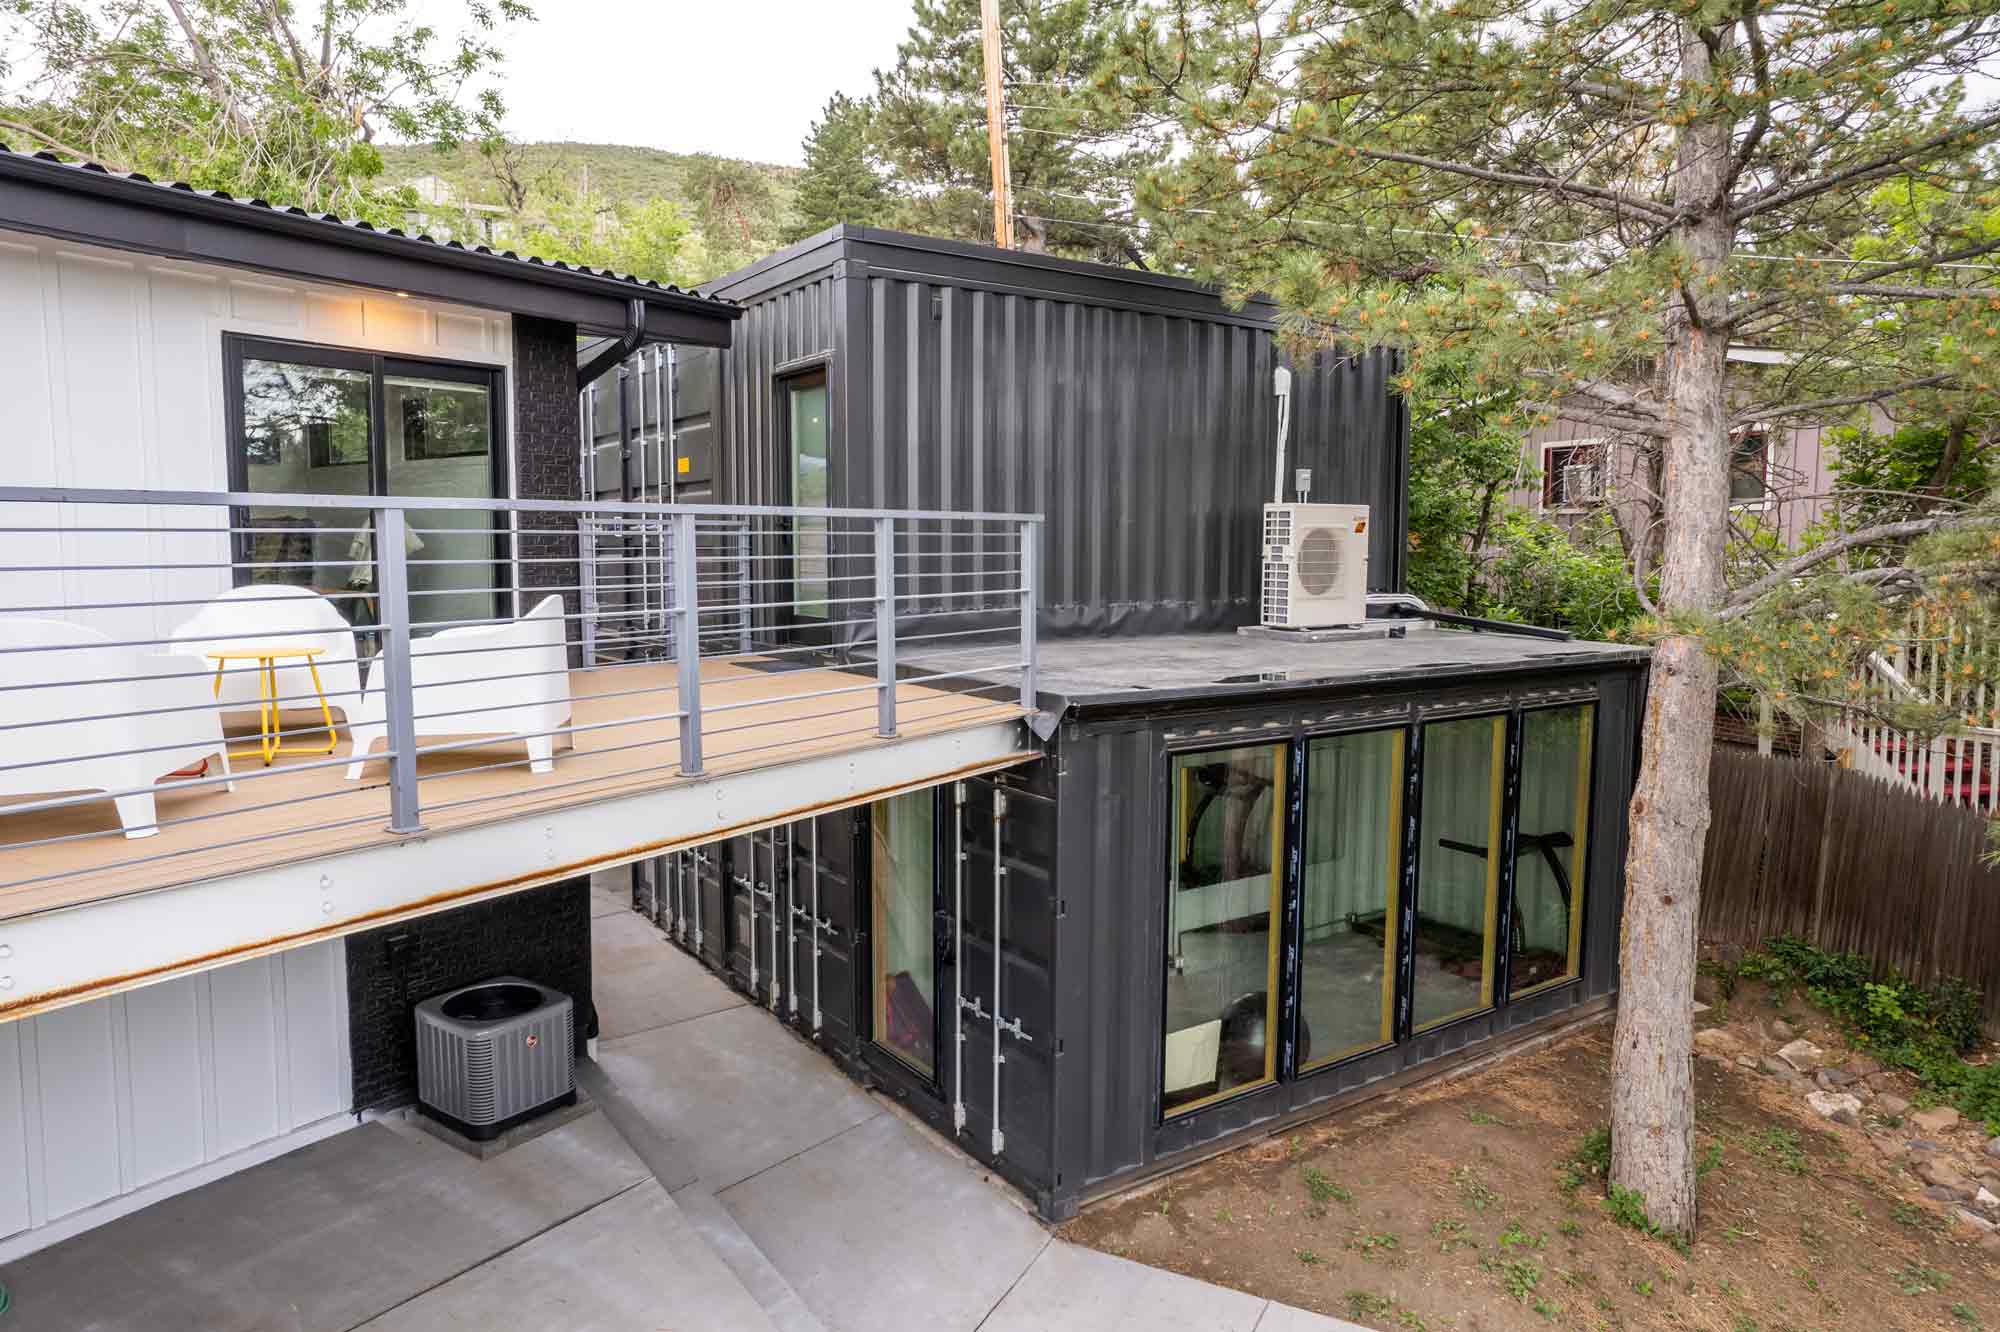 https://www.roxboxcontainers.com/wp-content/uploads/2022/06/B18-Bruder-Design-House-Garage-for-Web.jpg